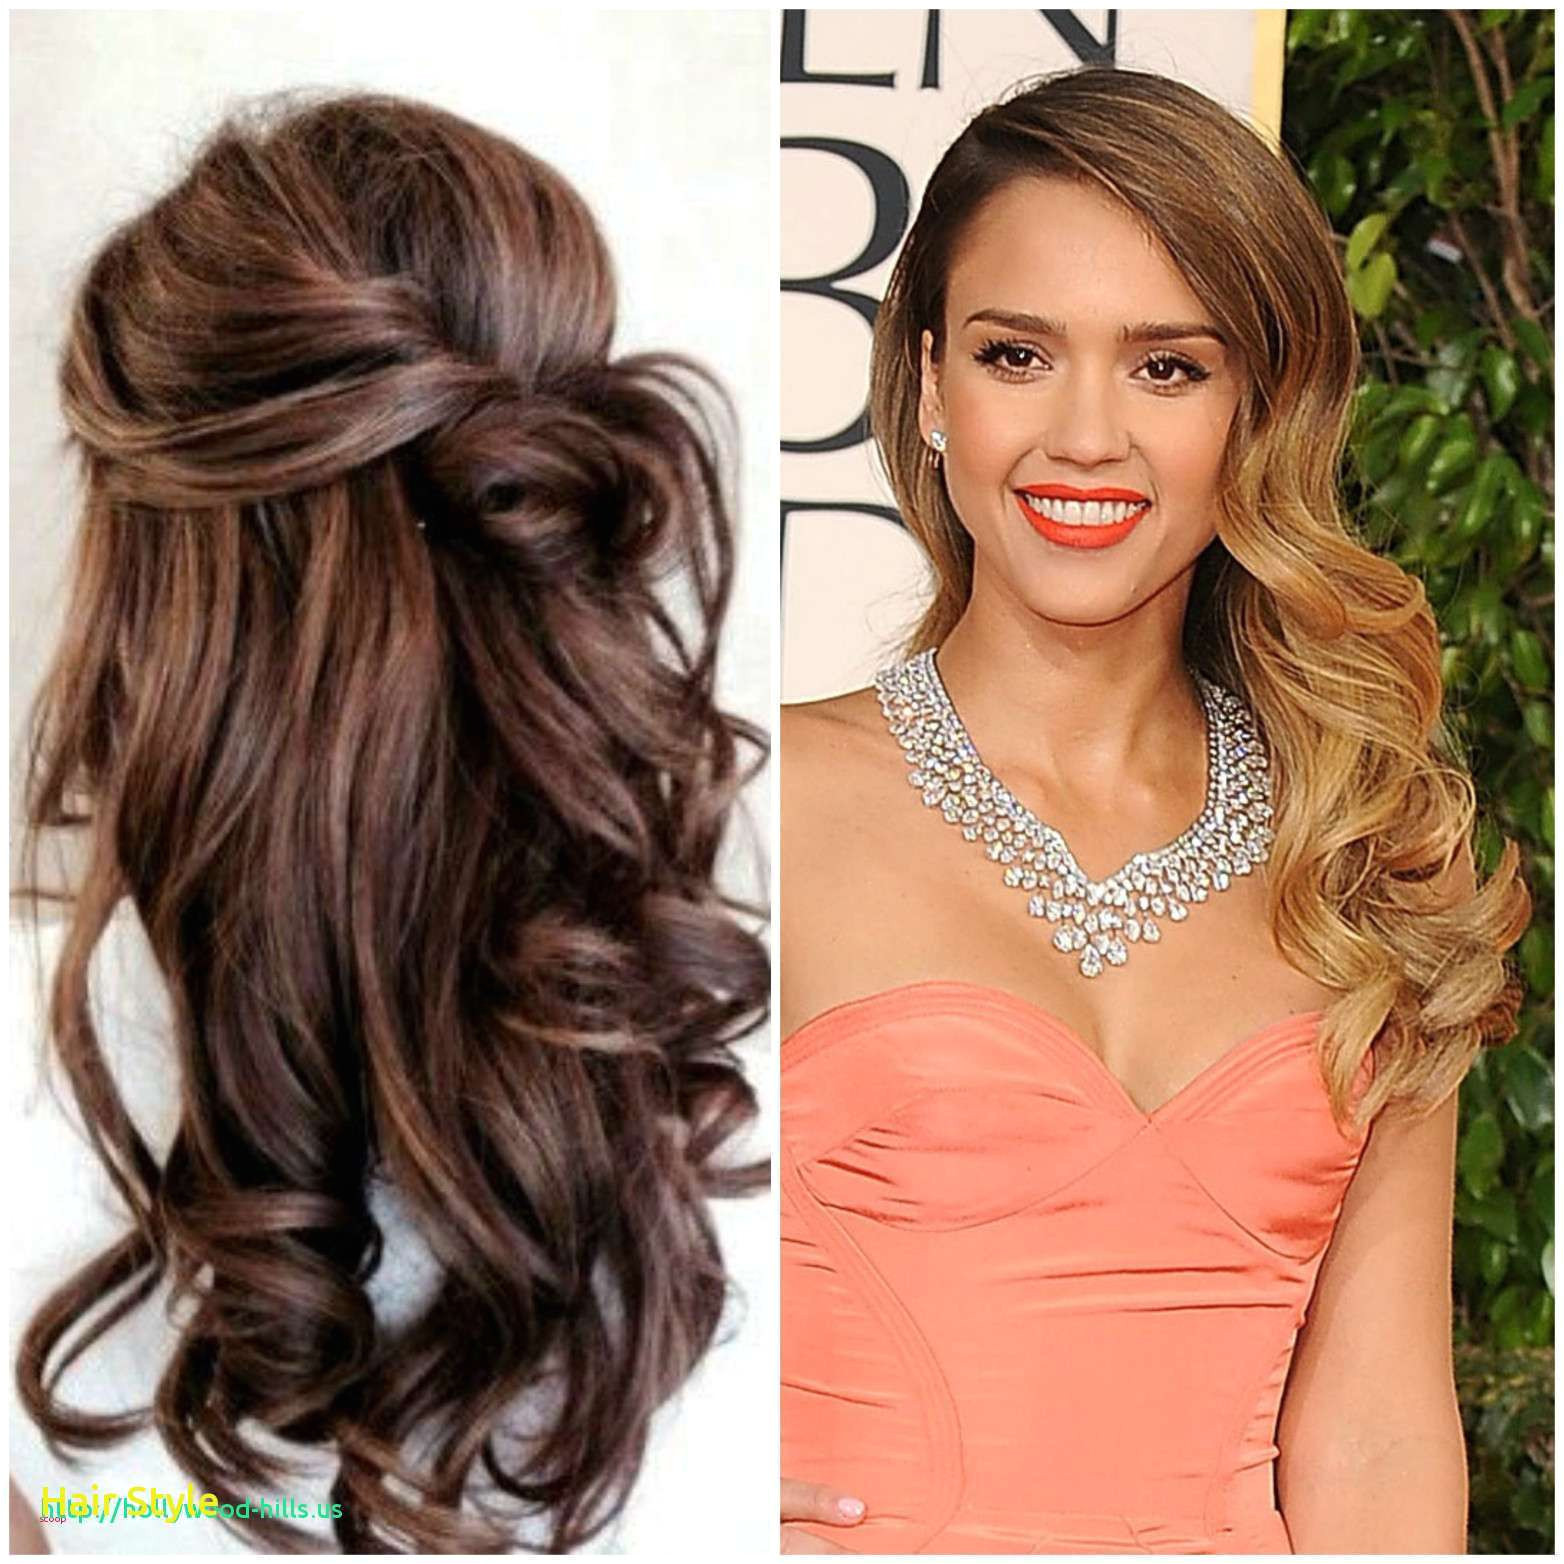 quick easy hairstyles unique inspirational hairstyles for long hair 2015 luxury i pinimg 1200x 0d simple Picture Unique Easy Hairstyles for Girls Step